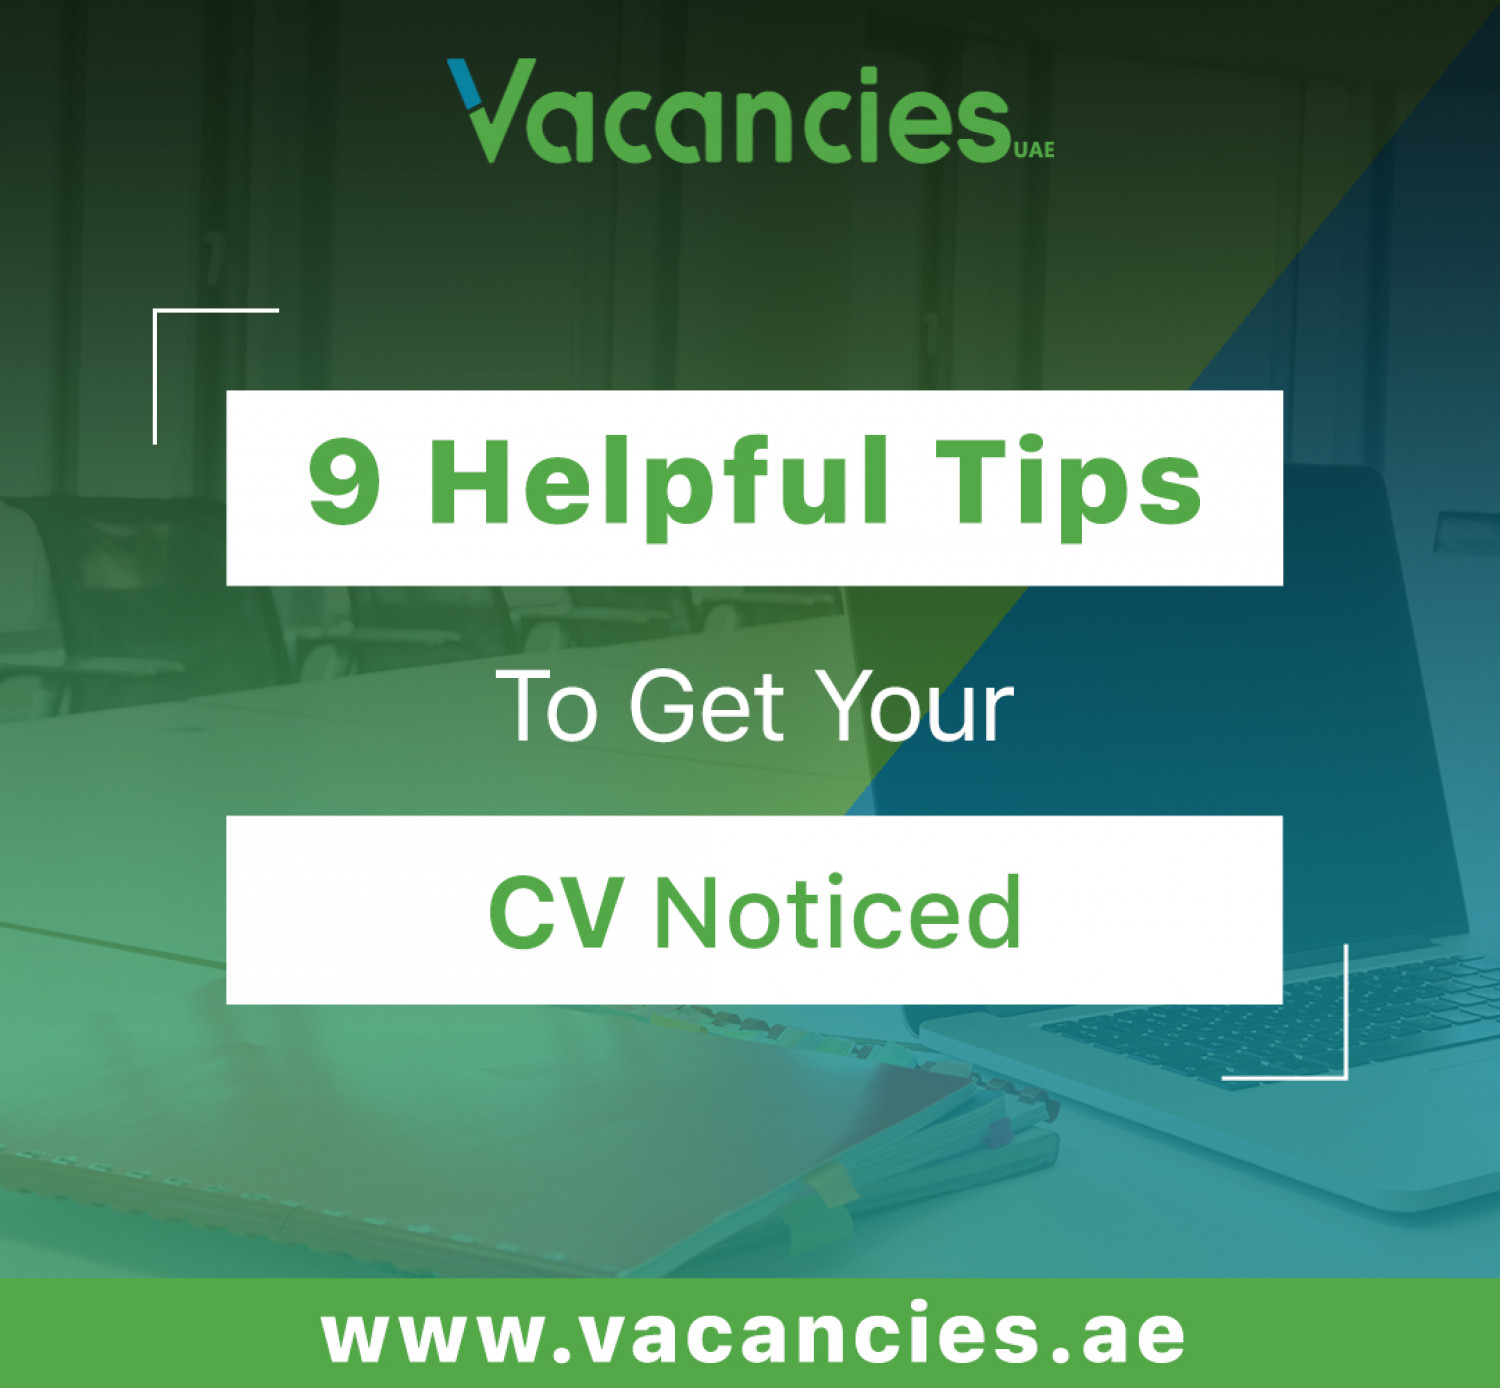 9 Helpful Tips to get your CV noticed Infographic